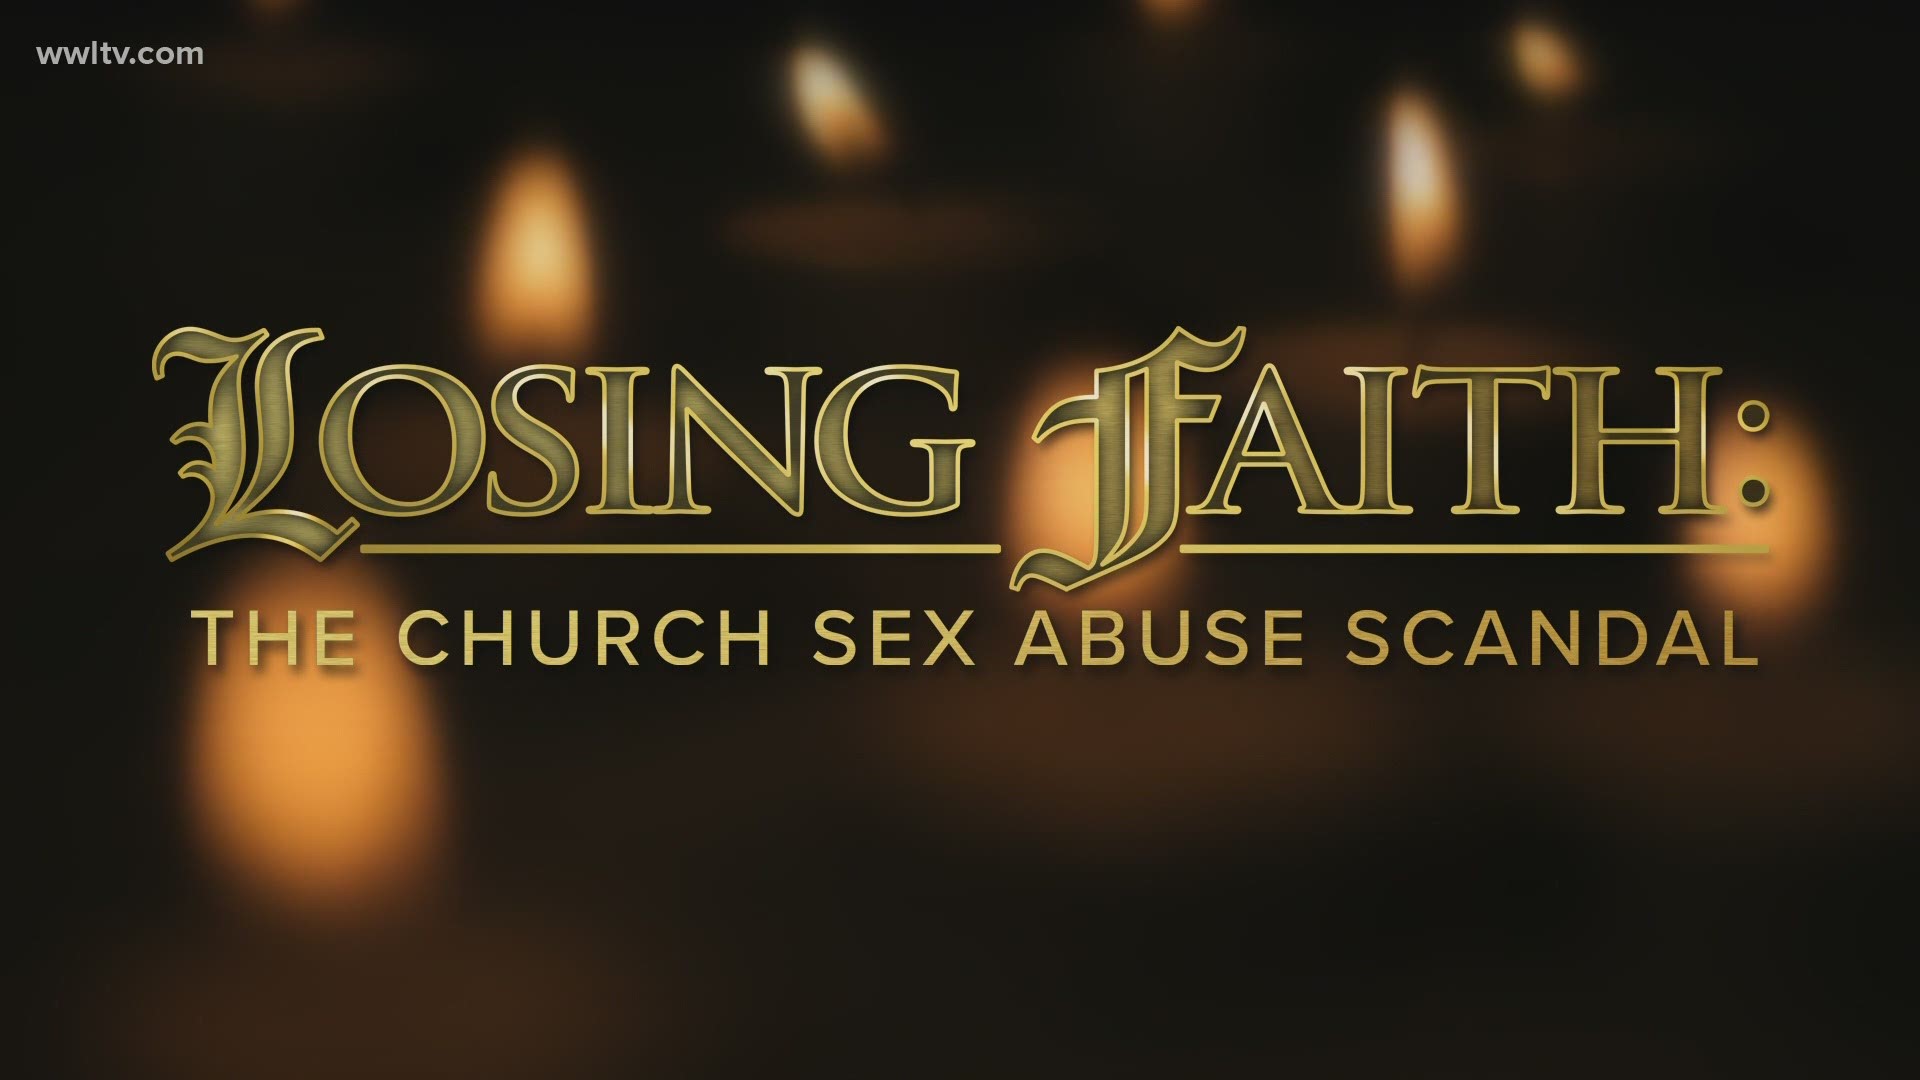 David Hammer investigates claims of sexual from clergymen dating back for years.